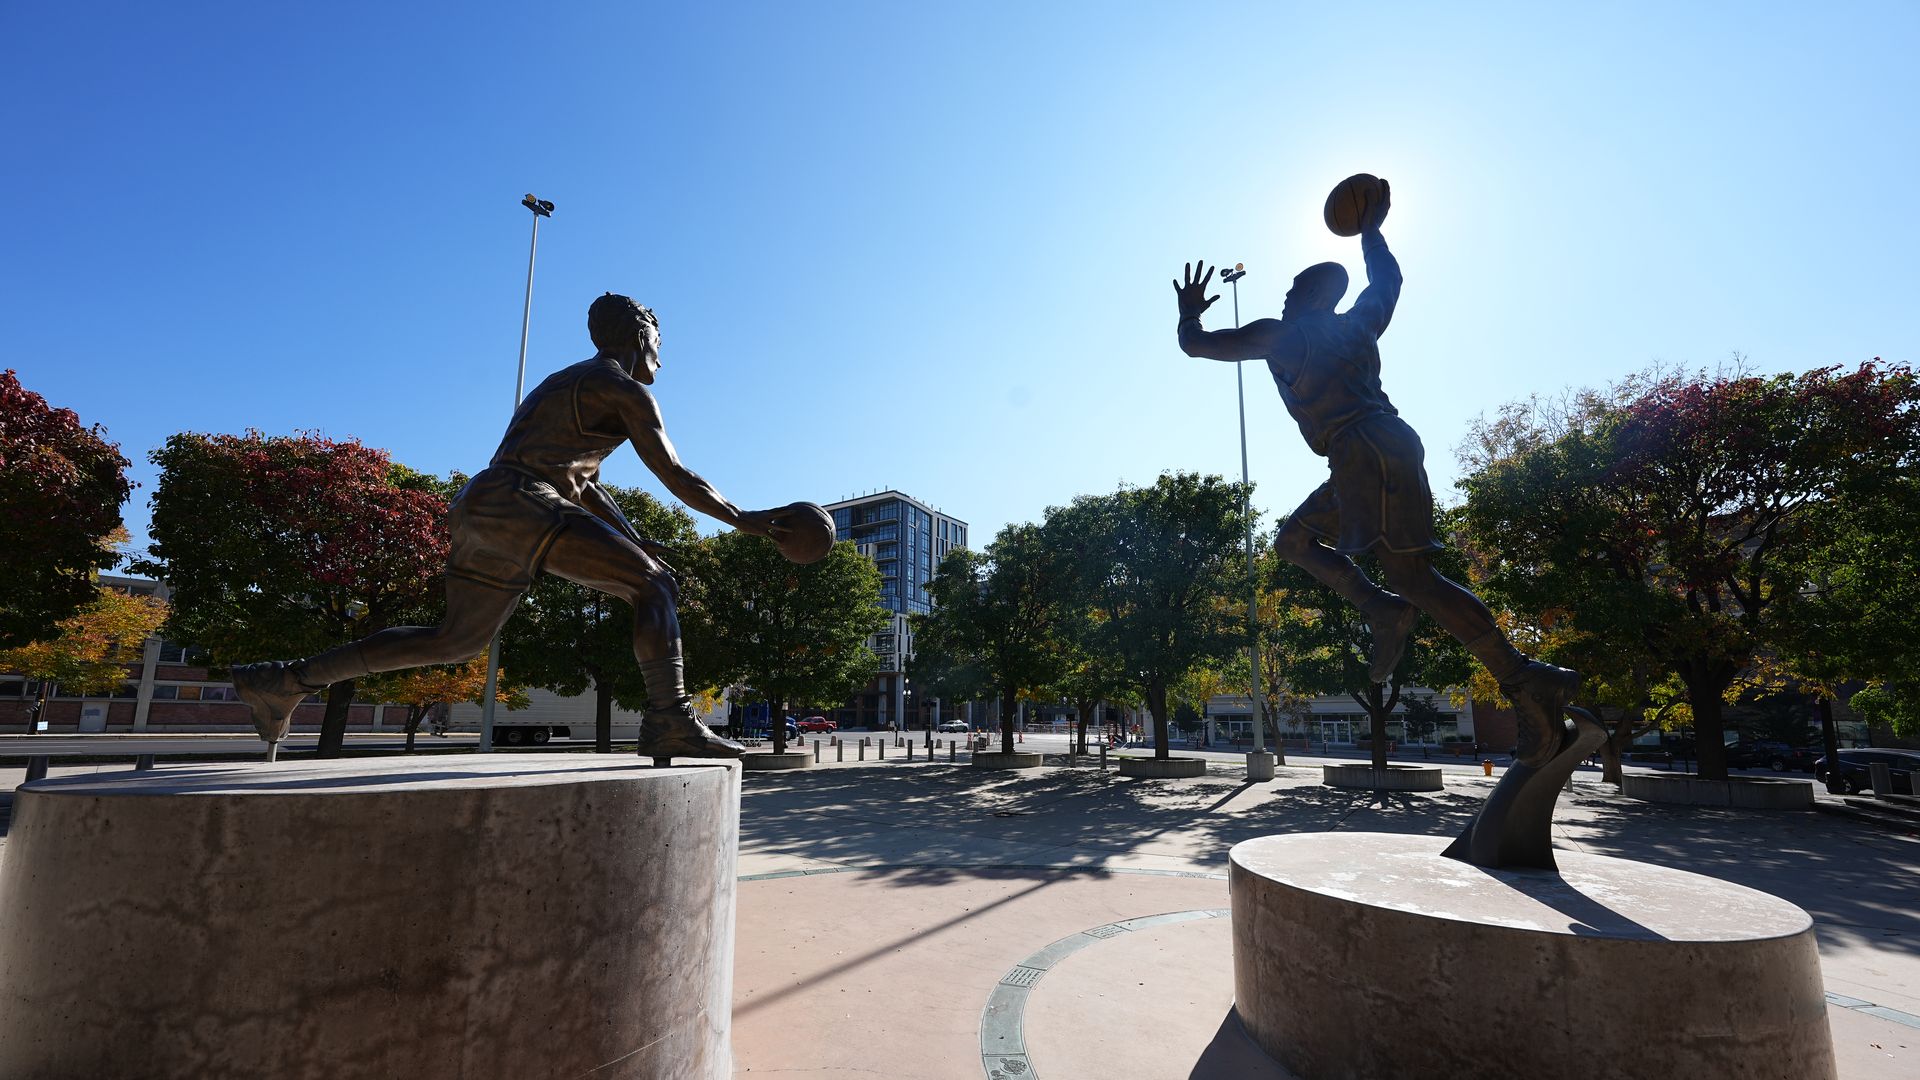 Statues of basketball players in a city plaza.